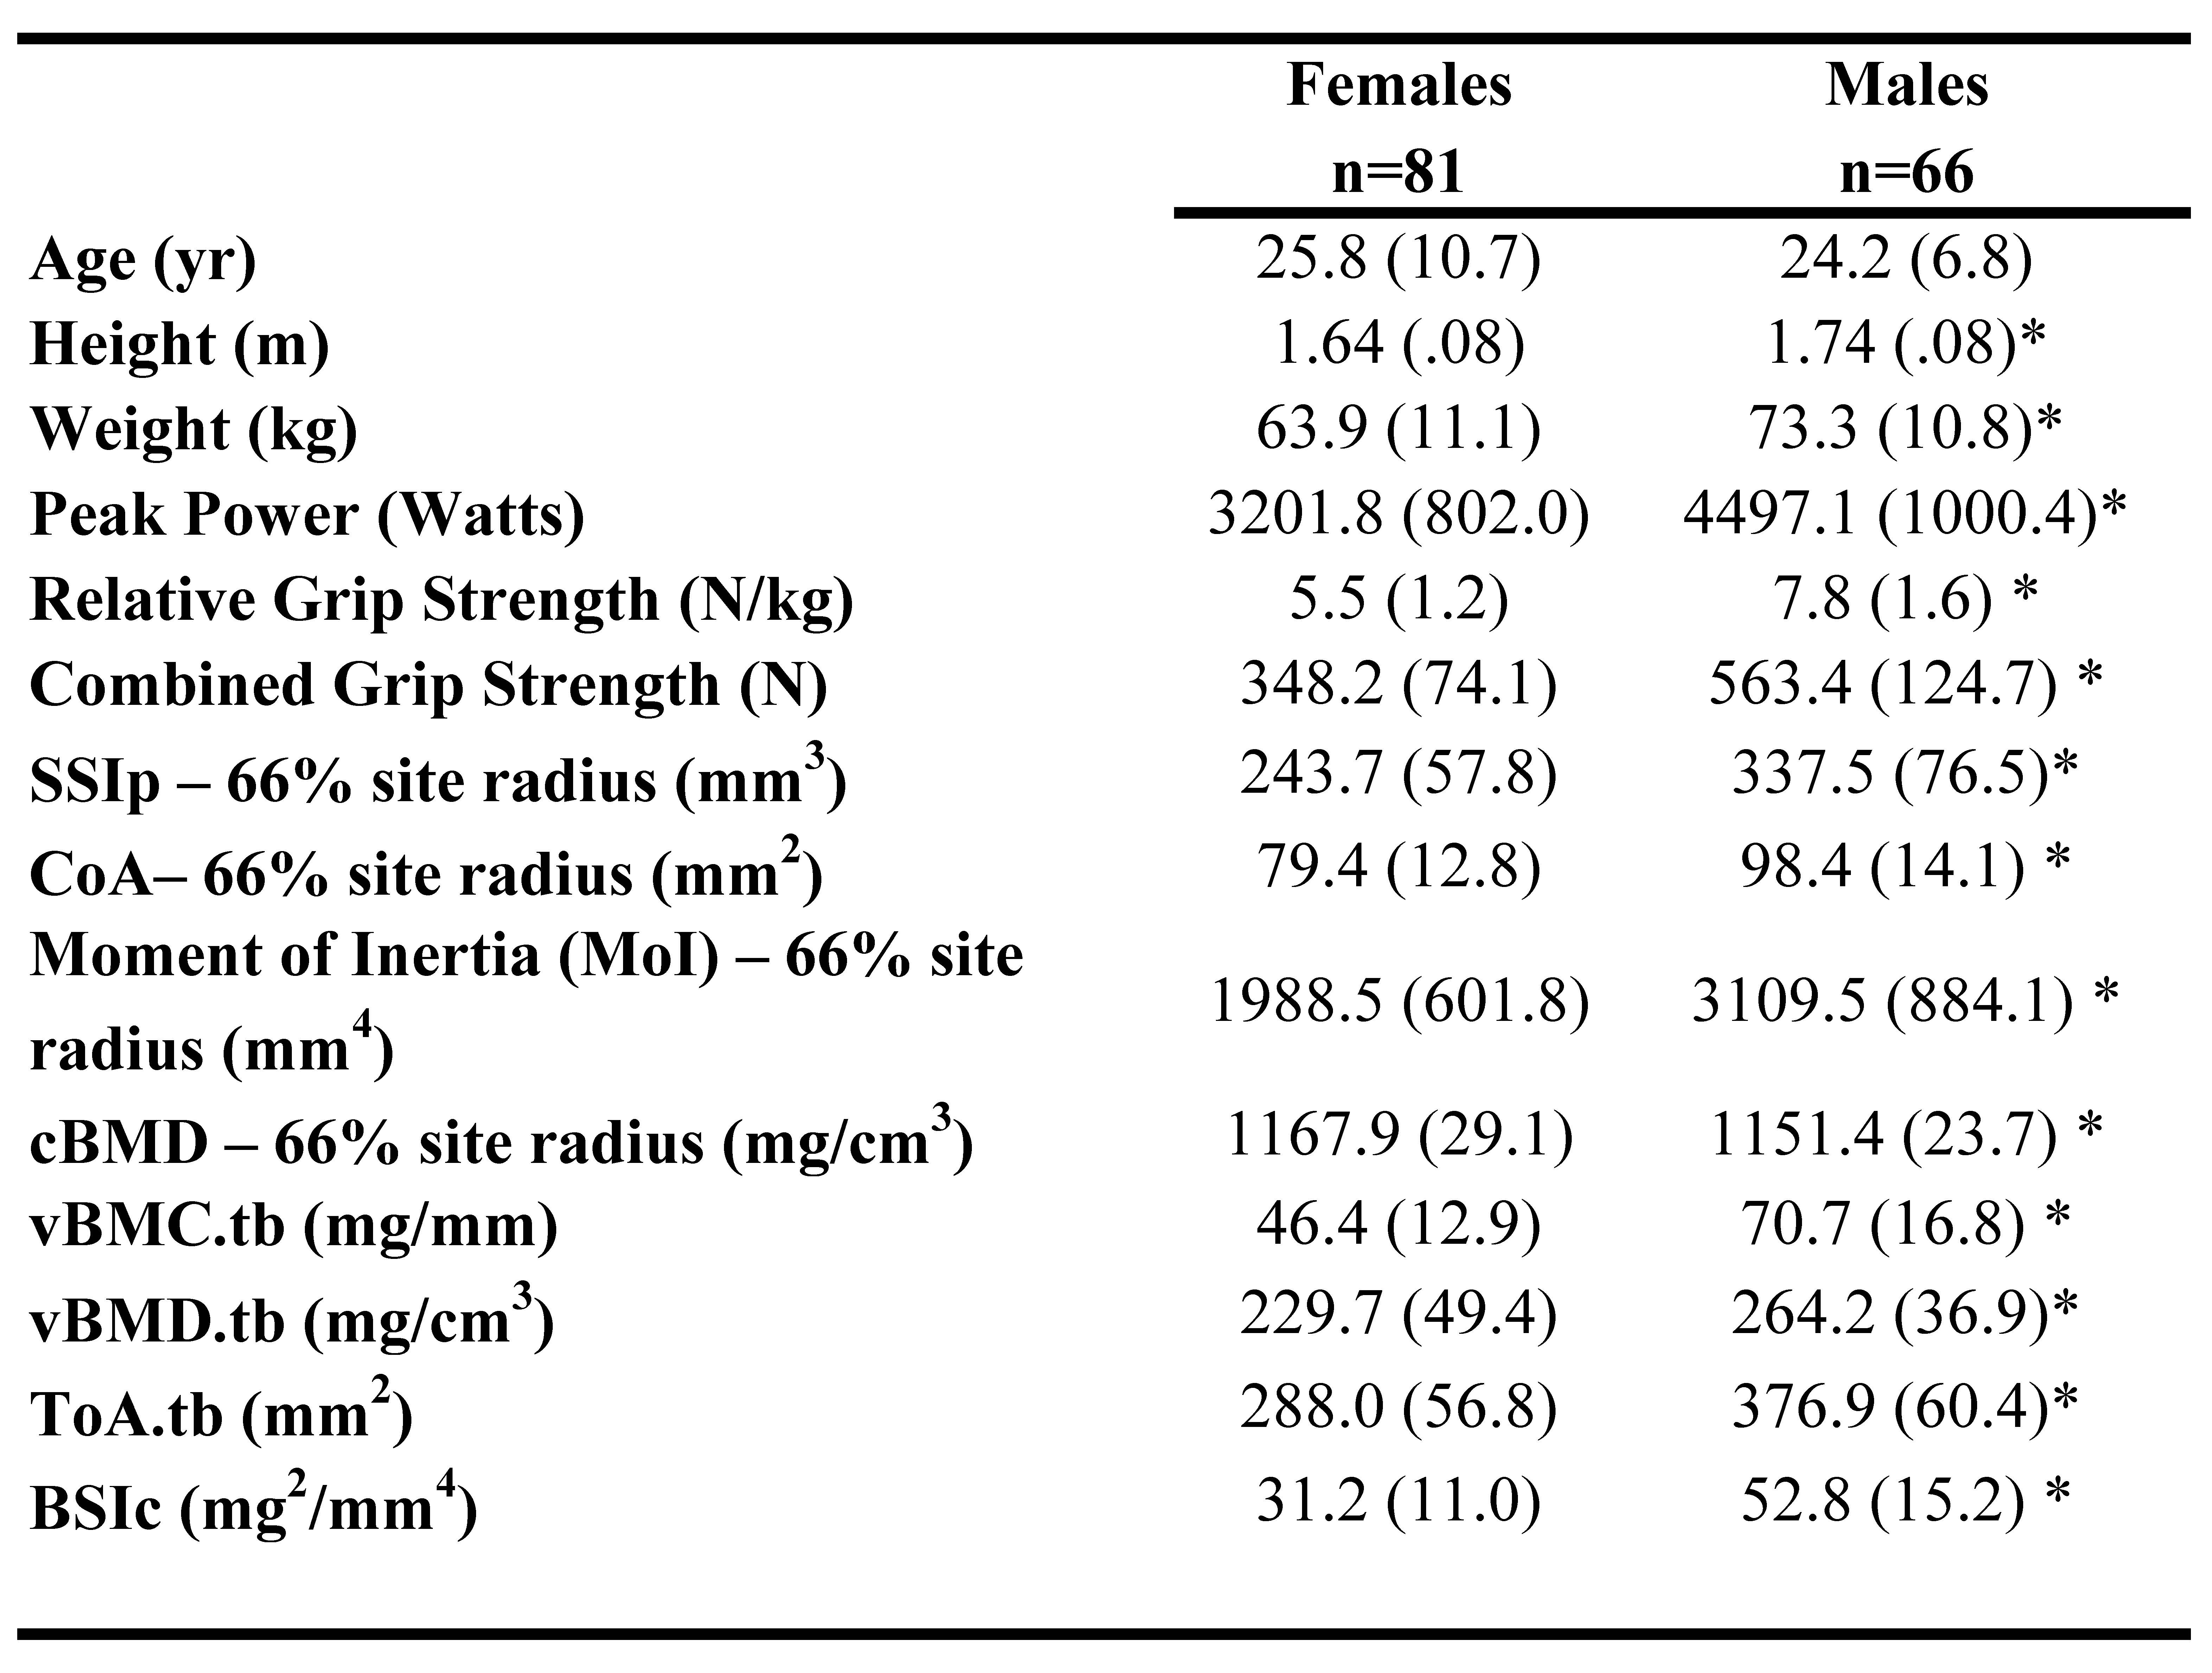 <b>Table 1</b>: Participant characteristics for Females and Males. Asterisk (*) indicates significant difference from Females.